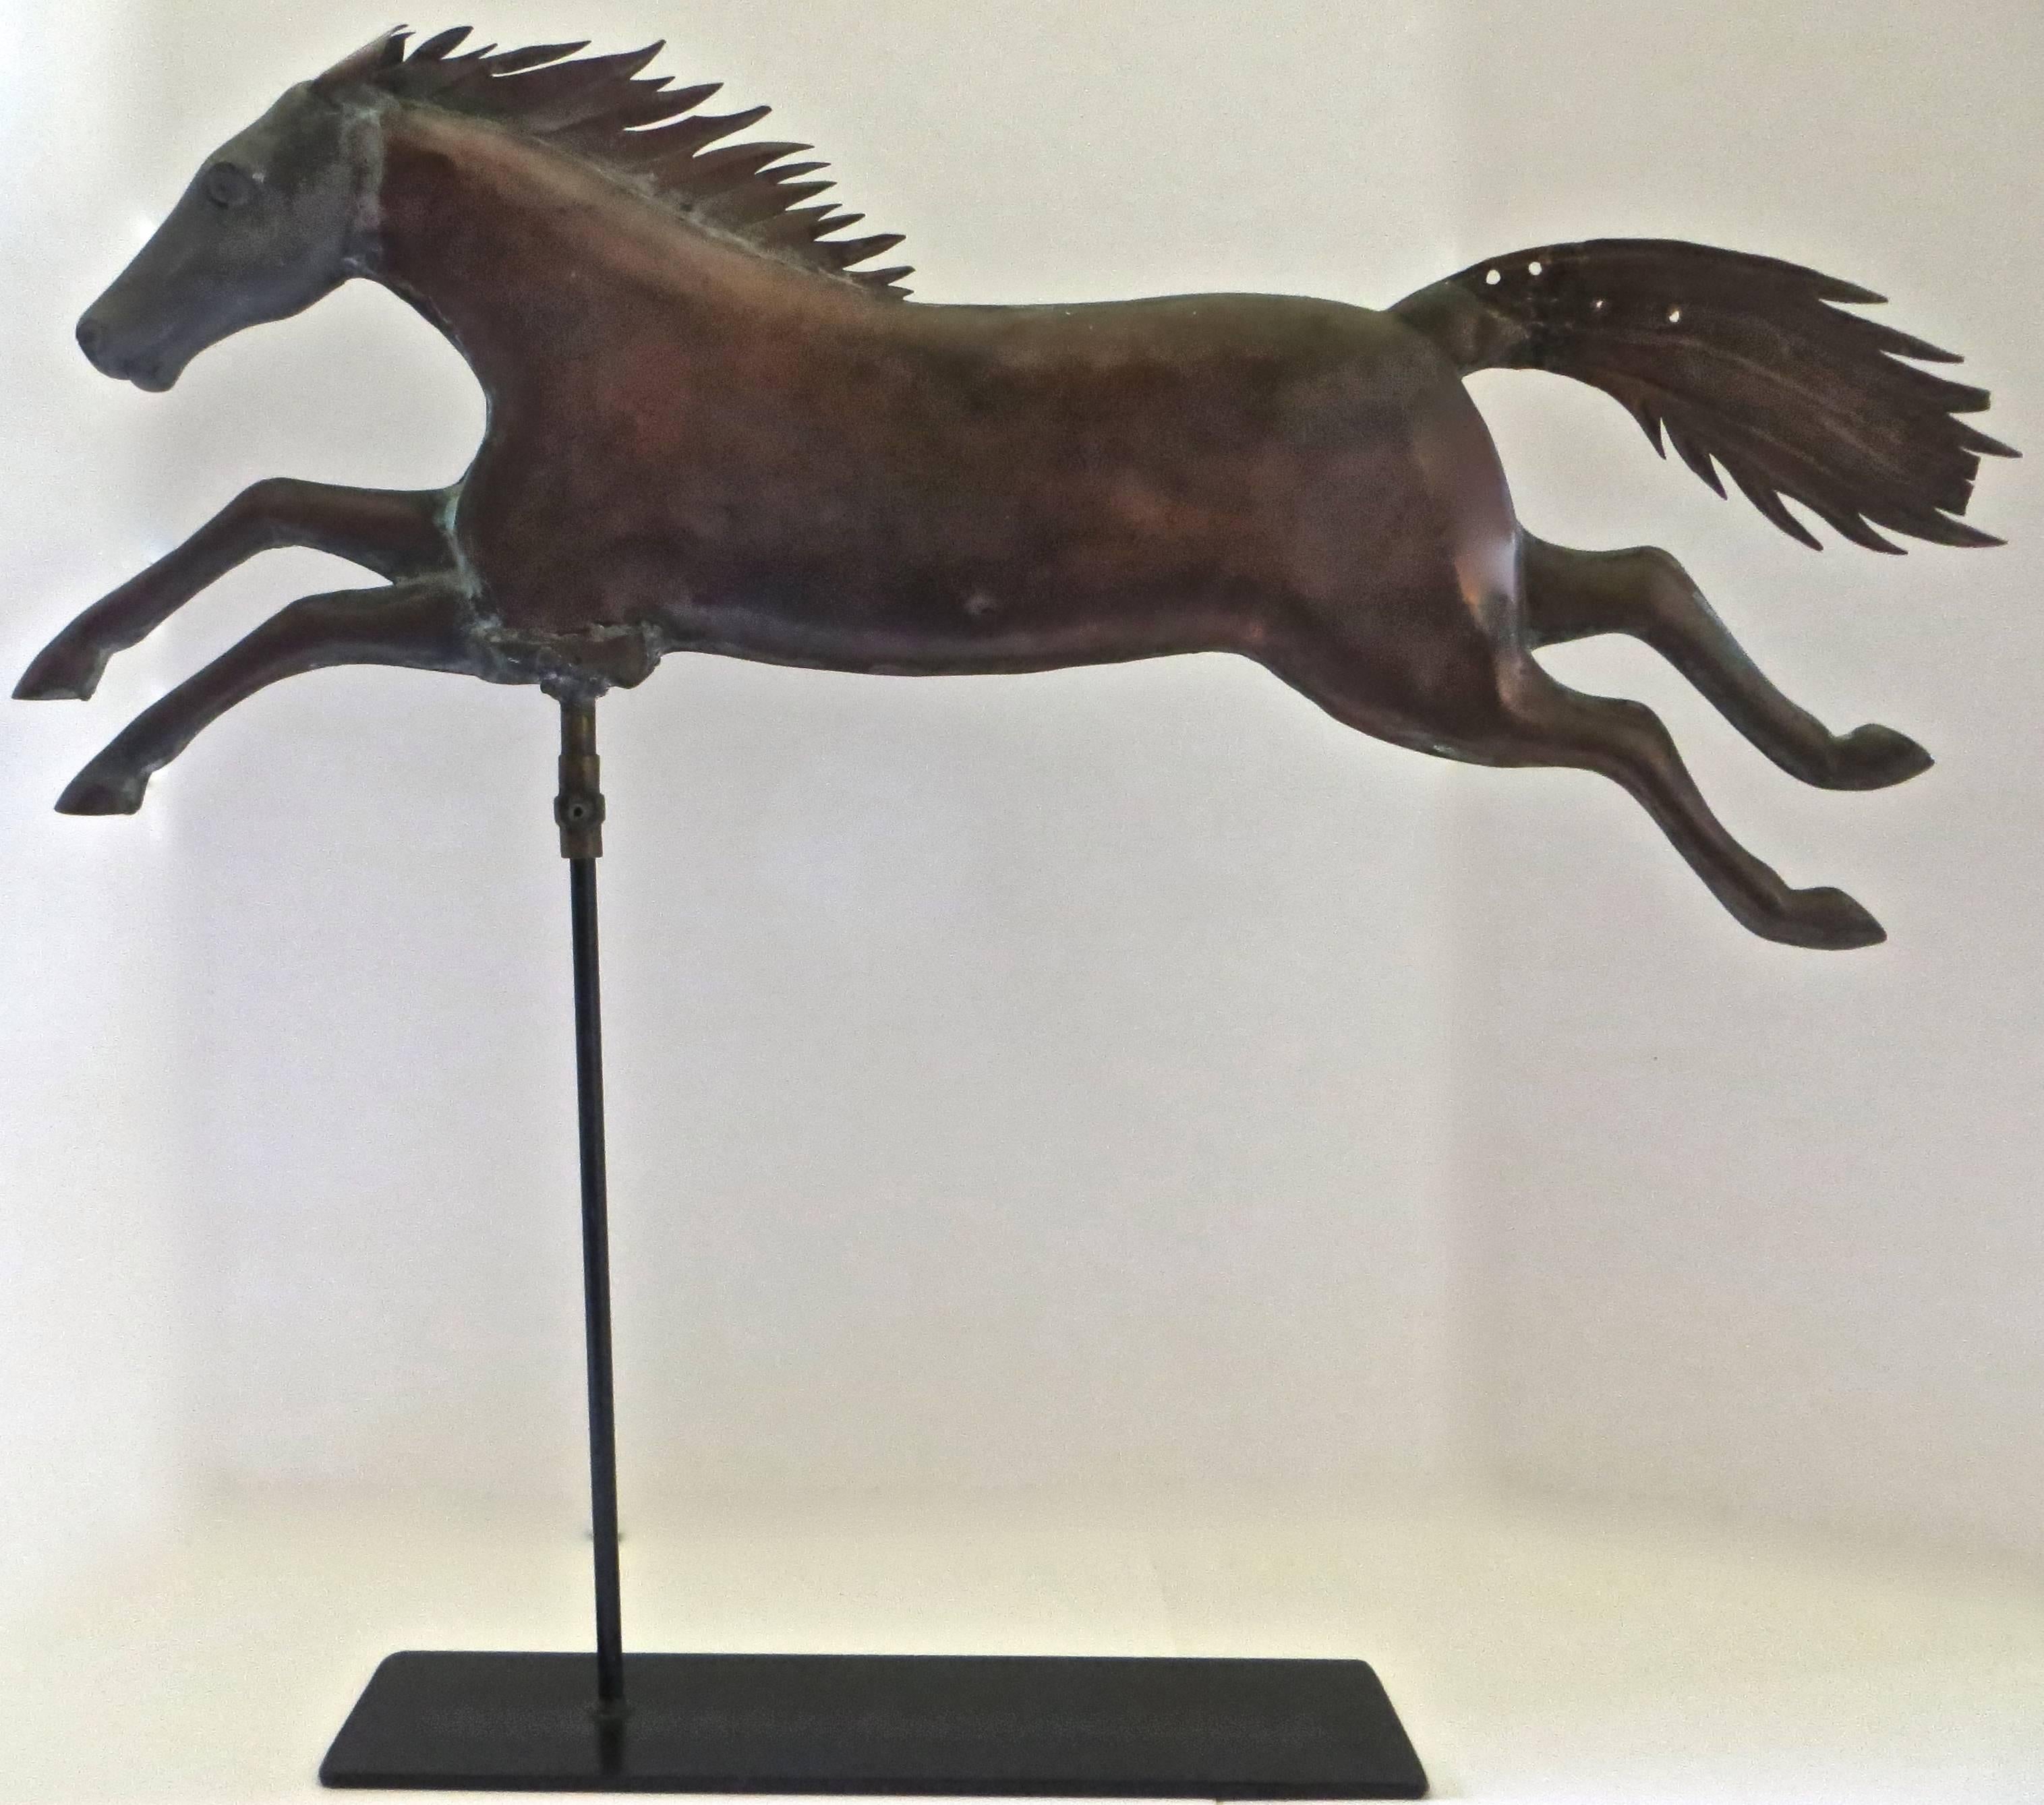 Late 19th century horse weathervane, influenced, undoubtedly, by the real life horse named 